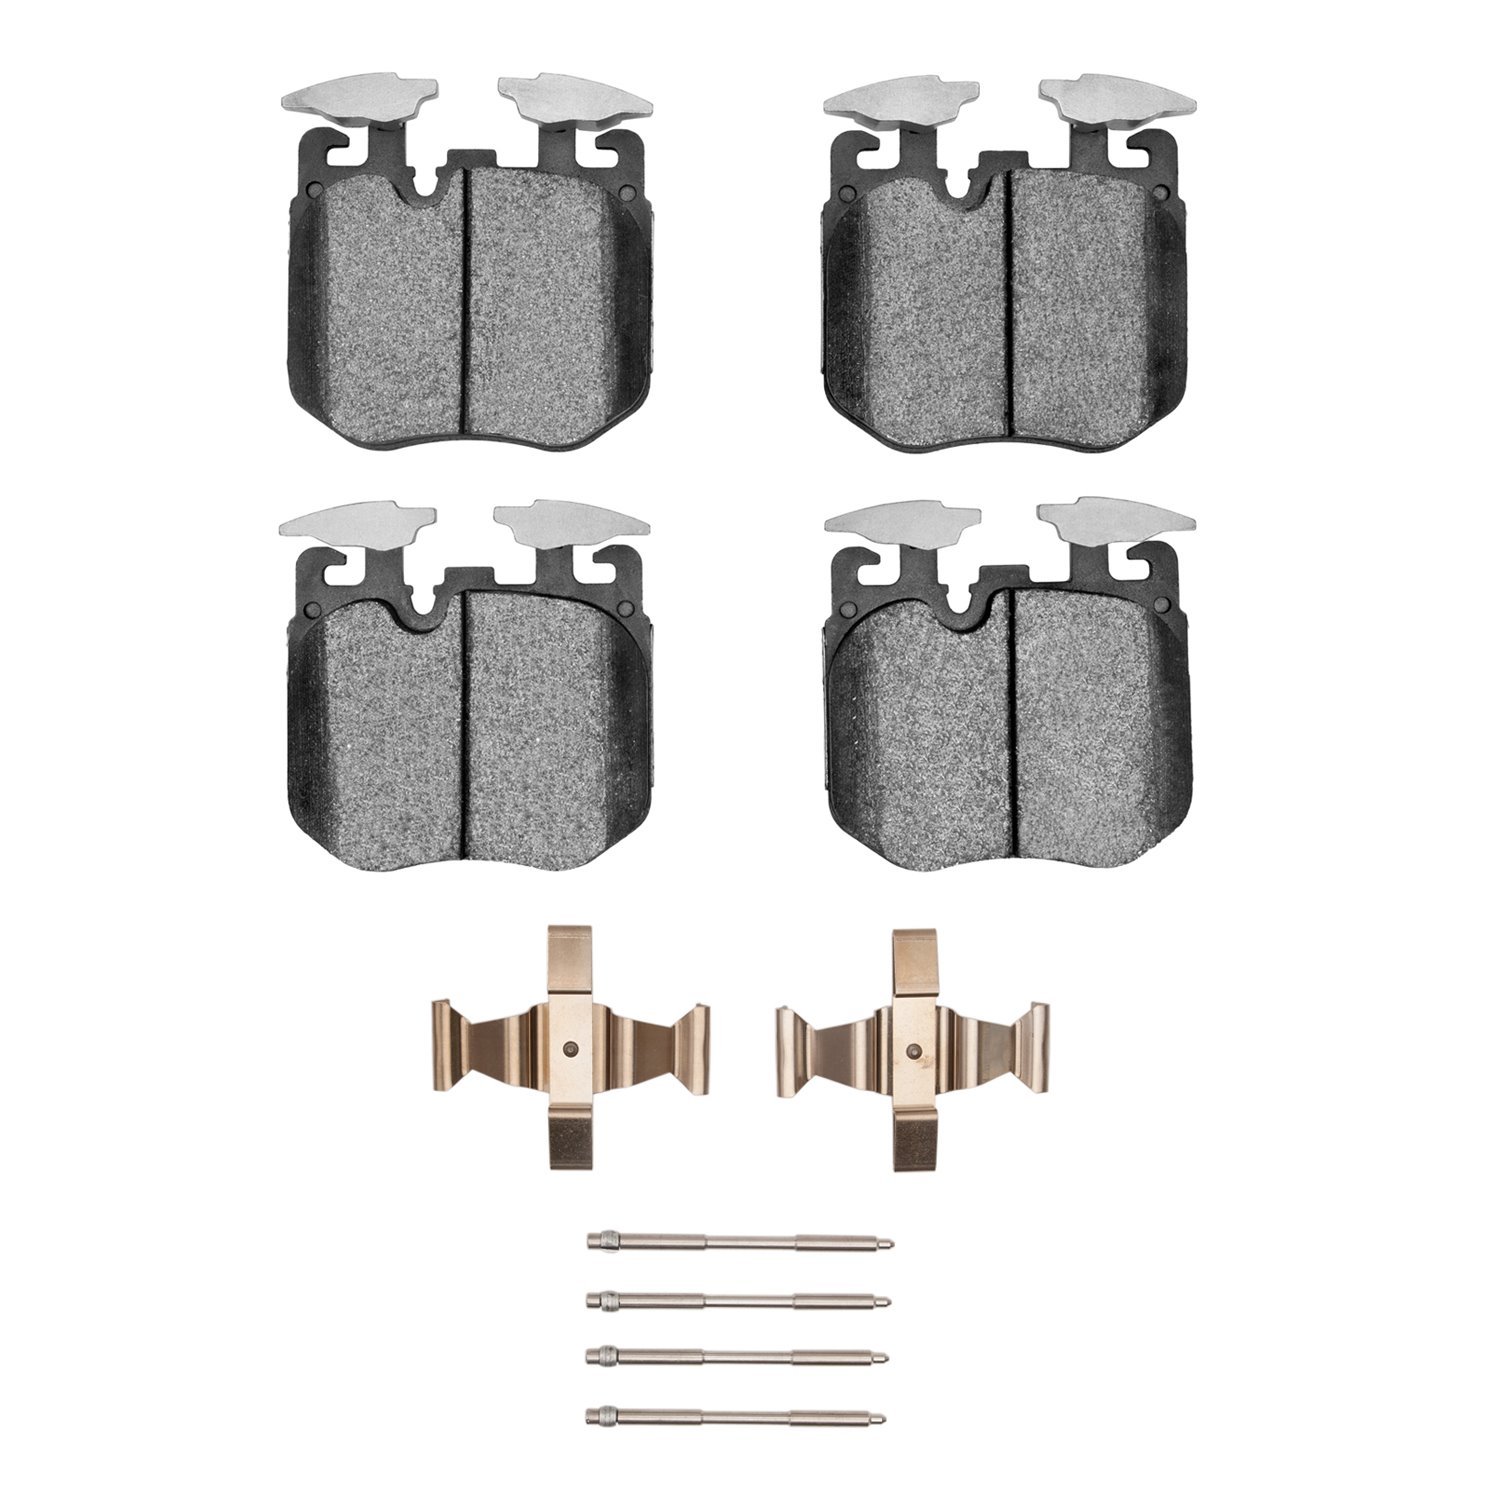 1552-1868-01 5000 Advanced Low-Metallic Brake Pads & Hardware Kit, Fits Select Multiple Makes/Models, Position: Front